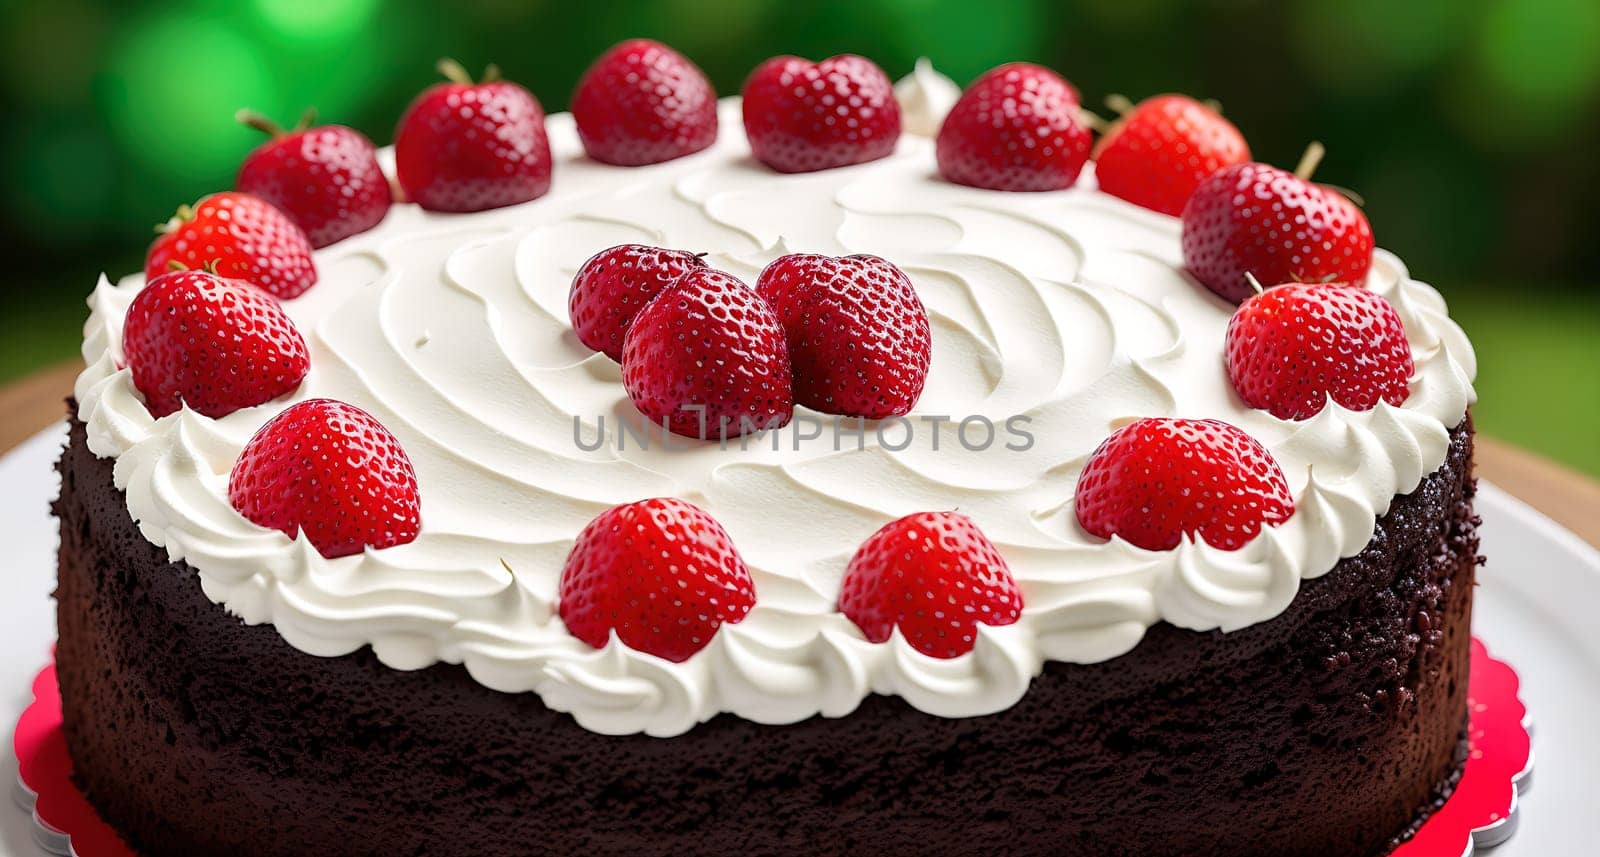 The image shows a delicious chocolate cake with fresh strawberries on top.